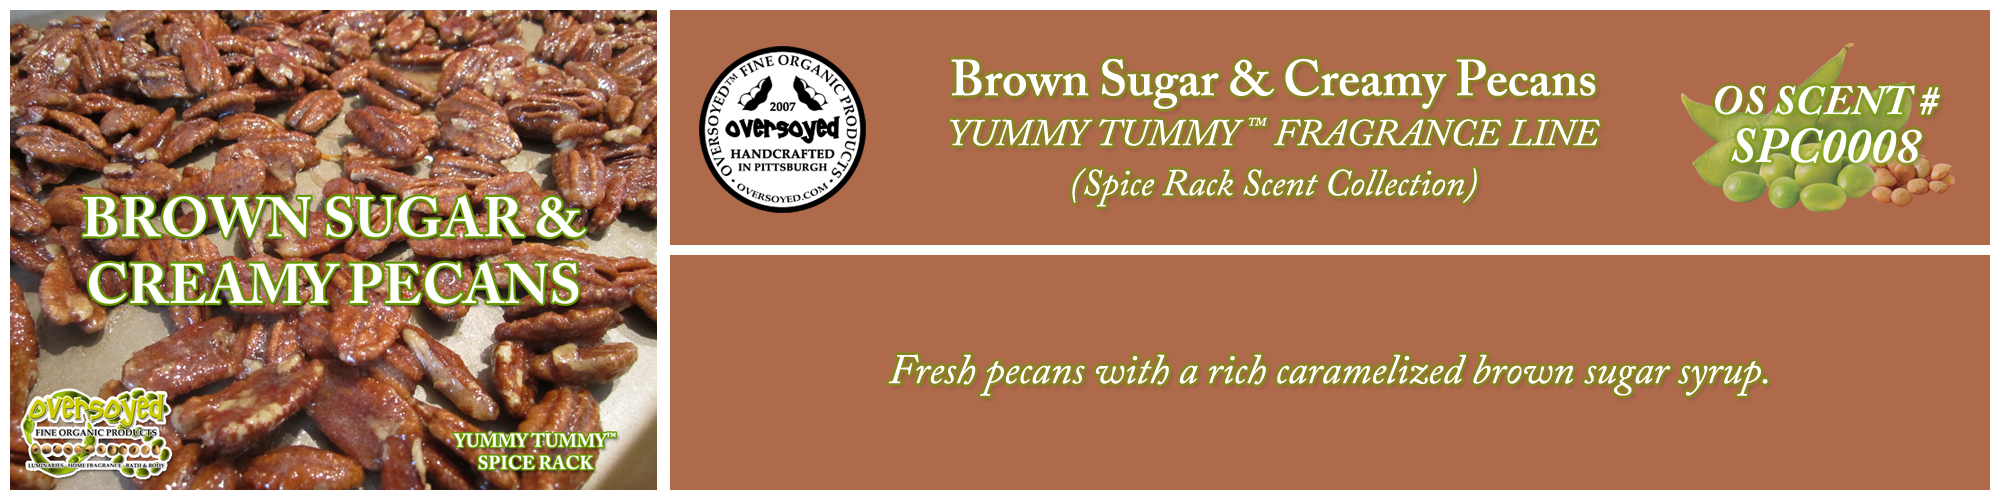 Brown Sugar & Creamy Pecans Handcrafted Products Collection